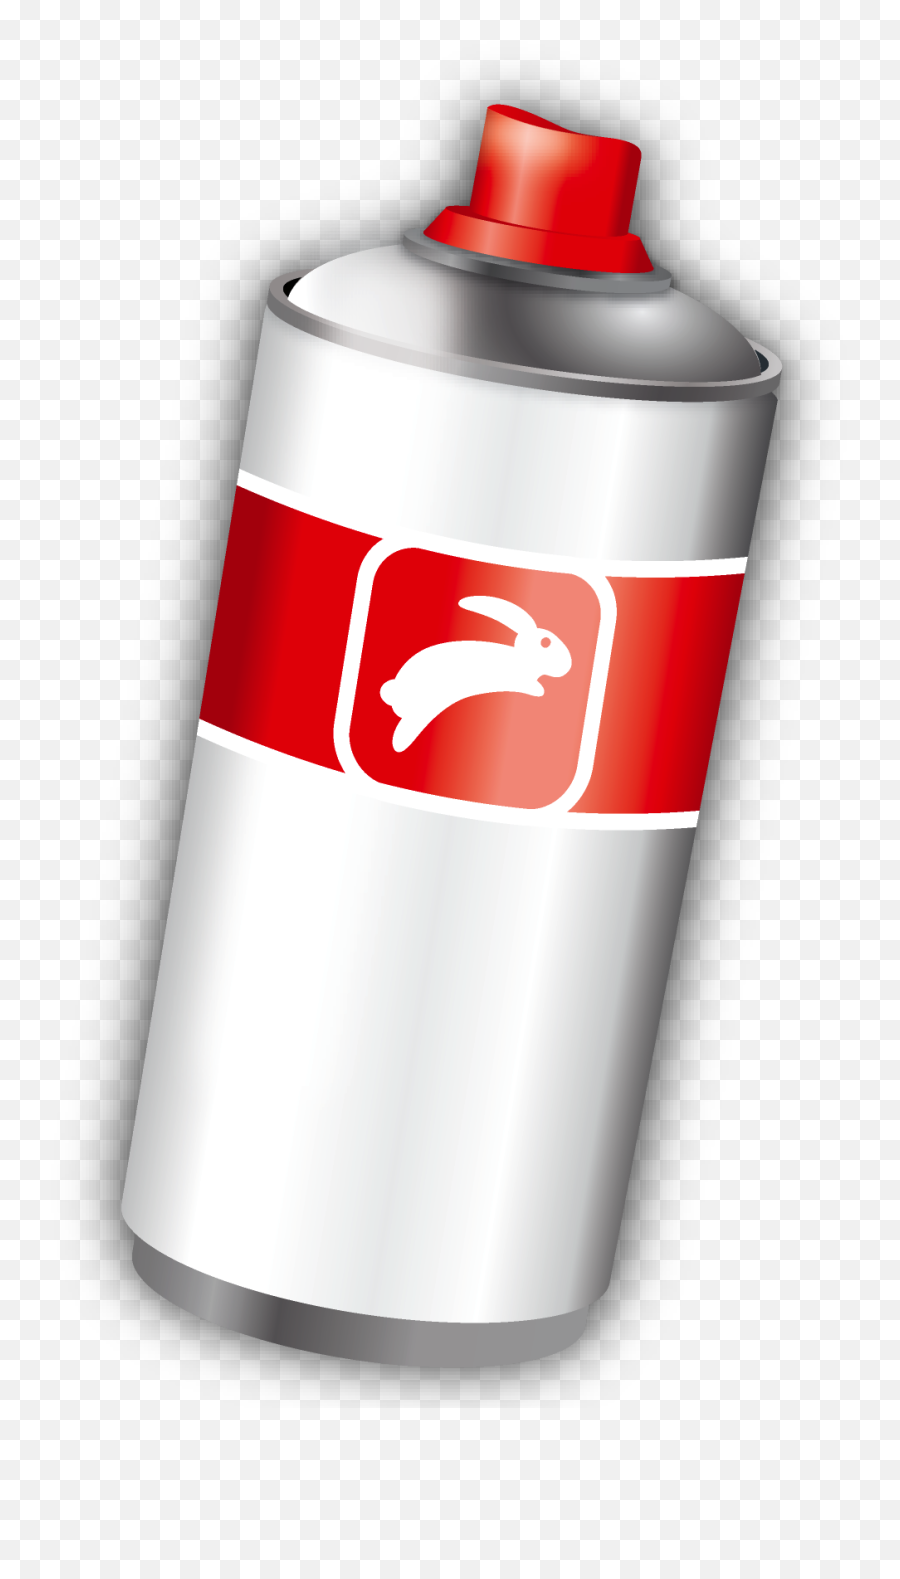 Png Spray Can Image - Spray Paint Can Transparent Background,Spray Paint X Png